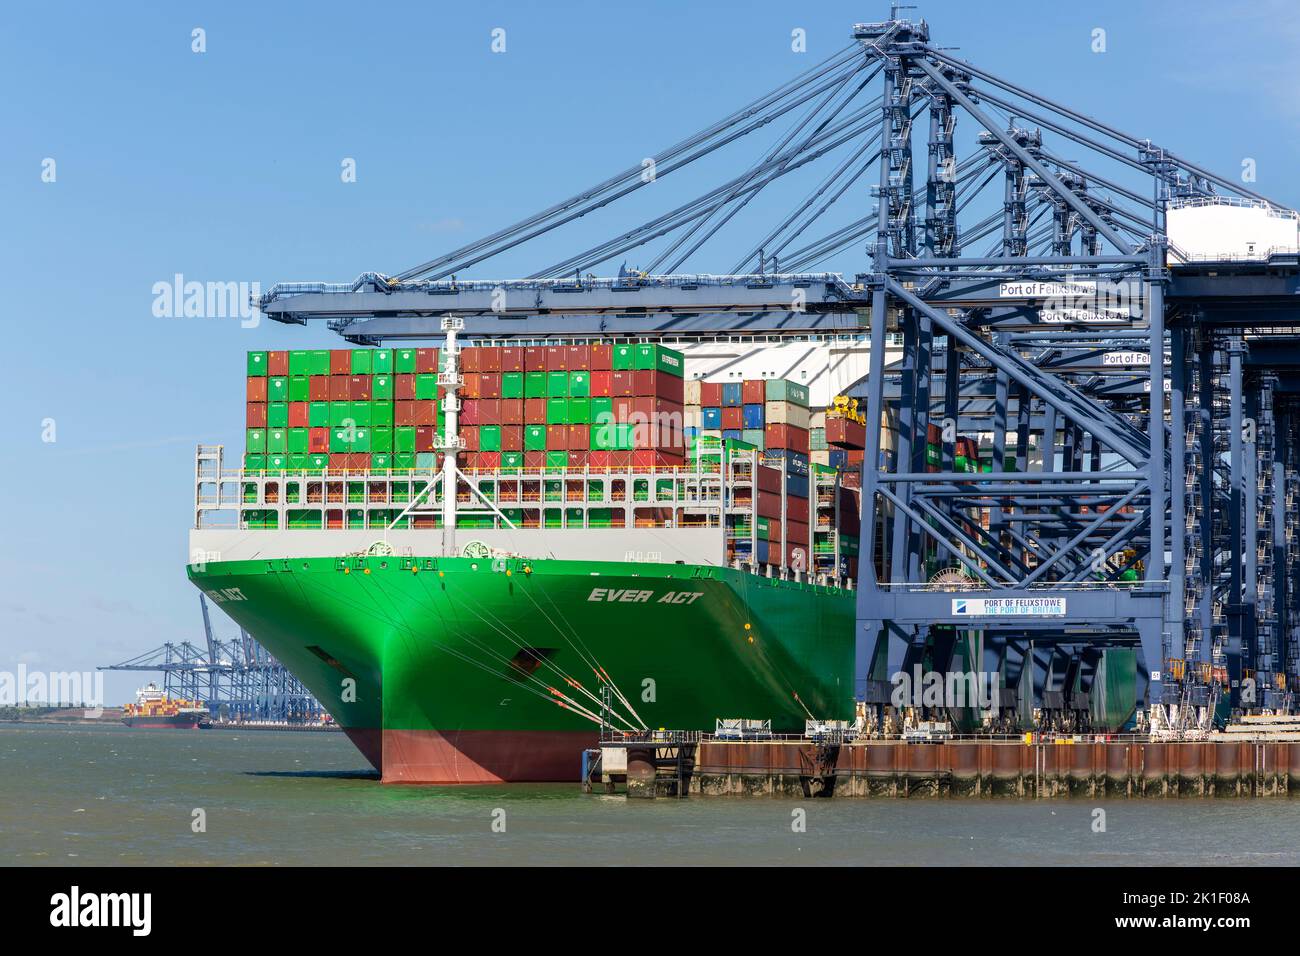 Evergreen Ever Act container ship and gantry cranes on quayside, Port of Felixstowe,  Suffolk,  England, UK Stock Photo